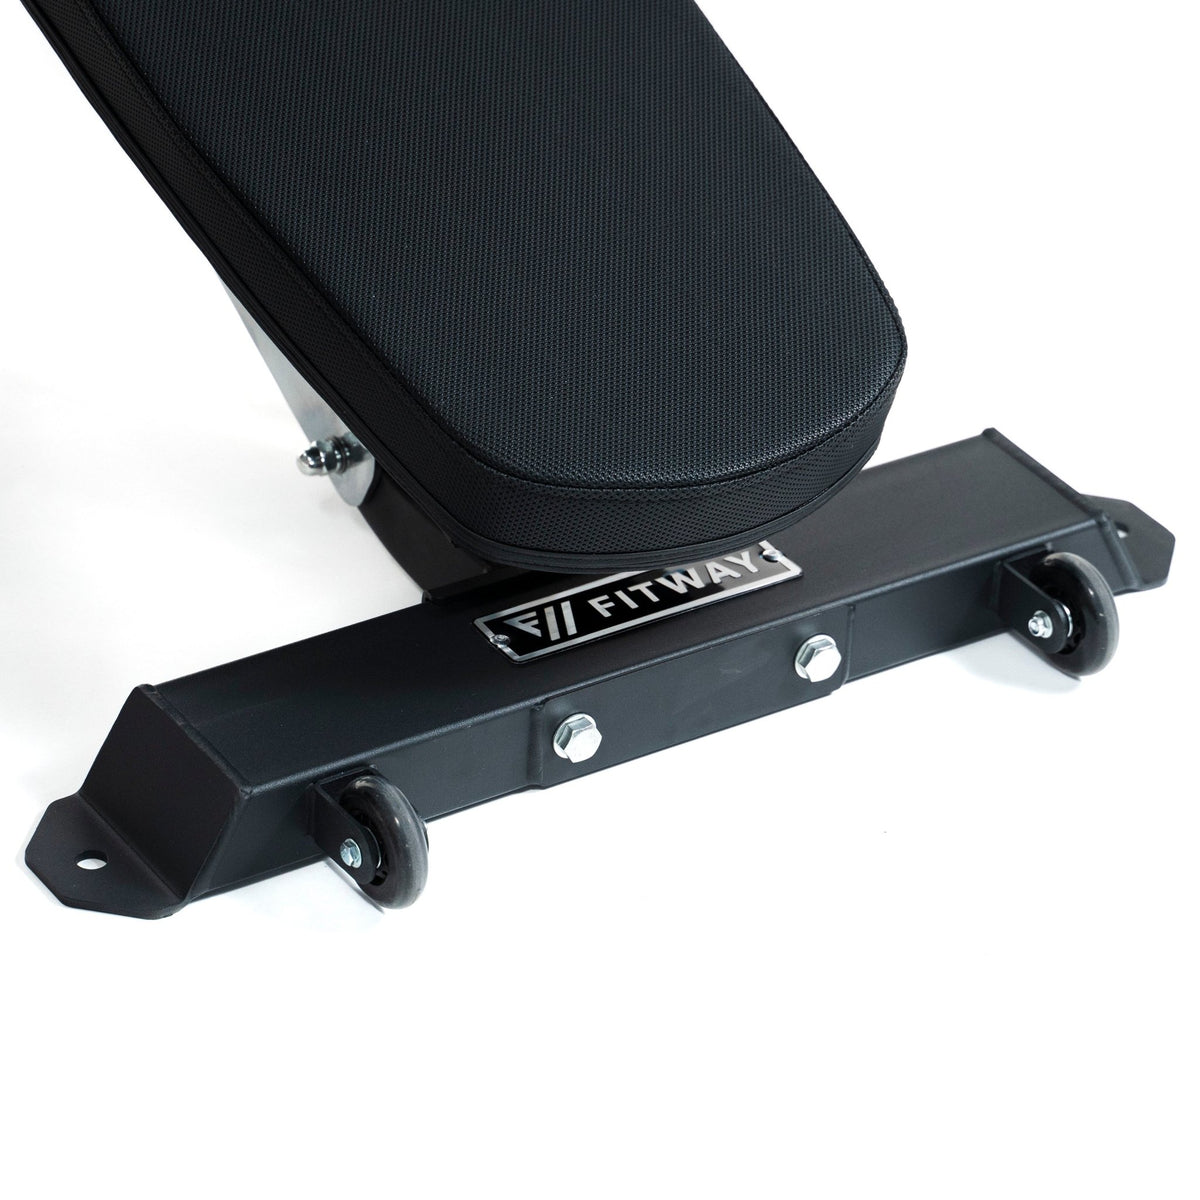 FitWay Equip. Fitway FID Adjustable Bench - Fitness Experience